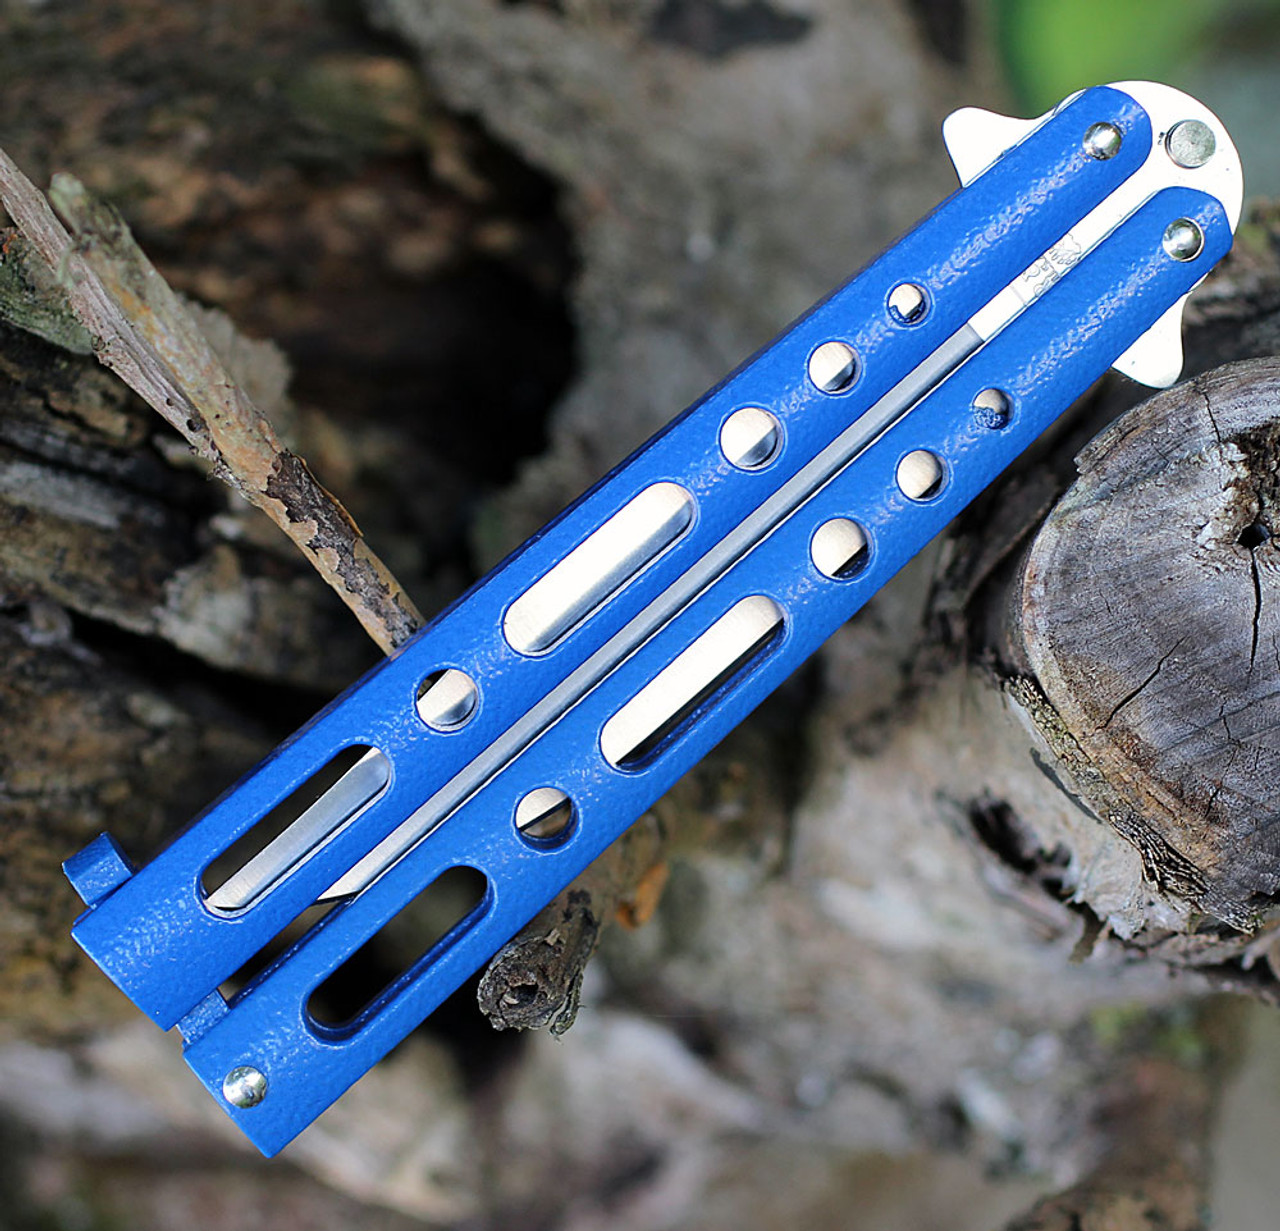 Bear & Son 117BL Butterfly Knife, 4" Stainless Plain Blade, Blue Metal Alloy Handle